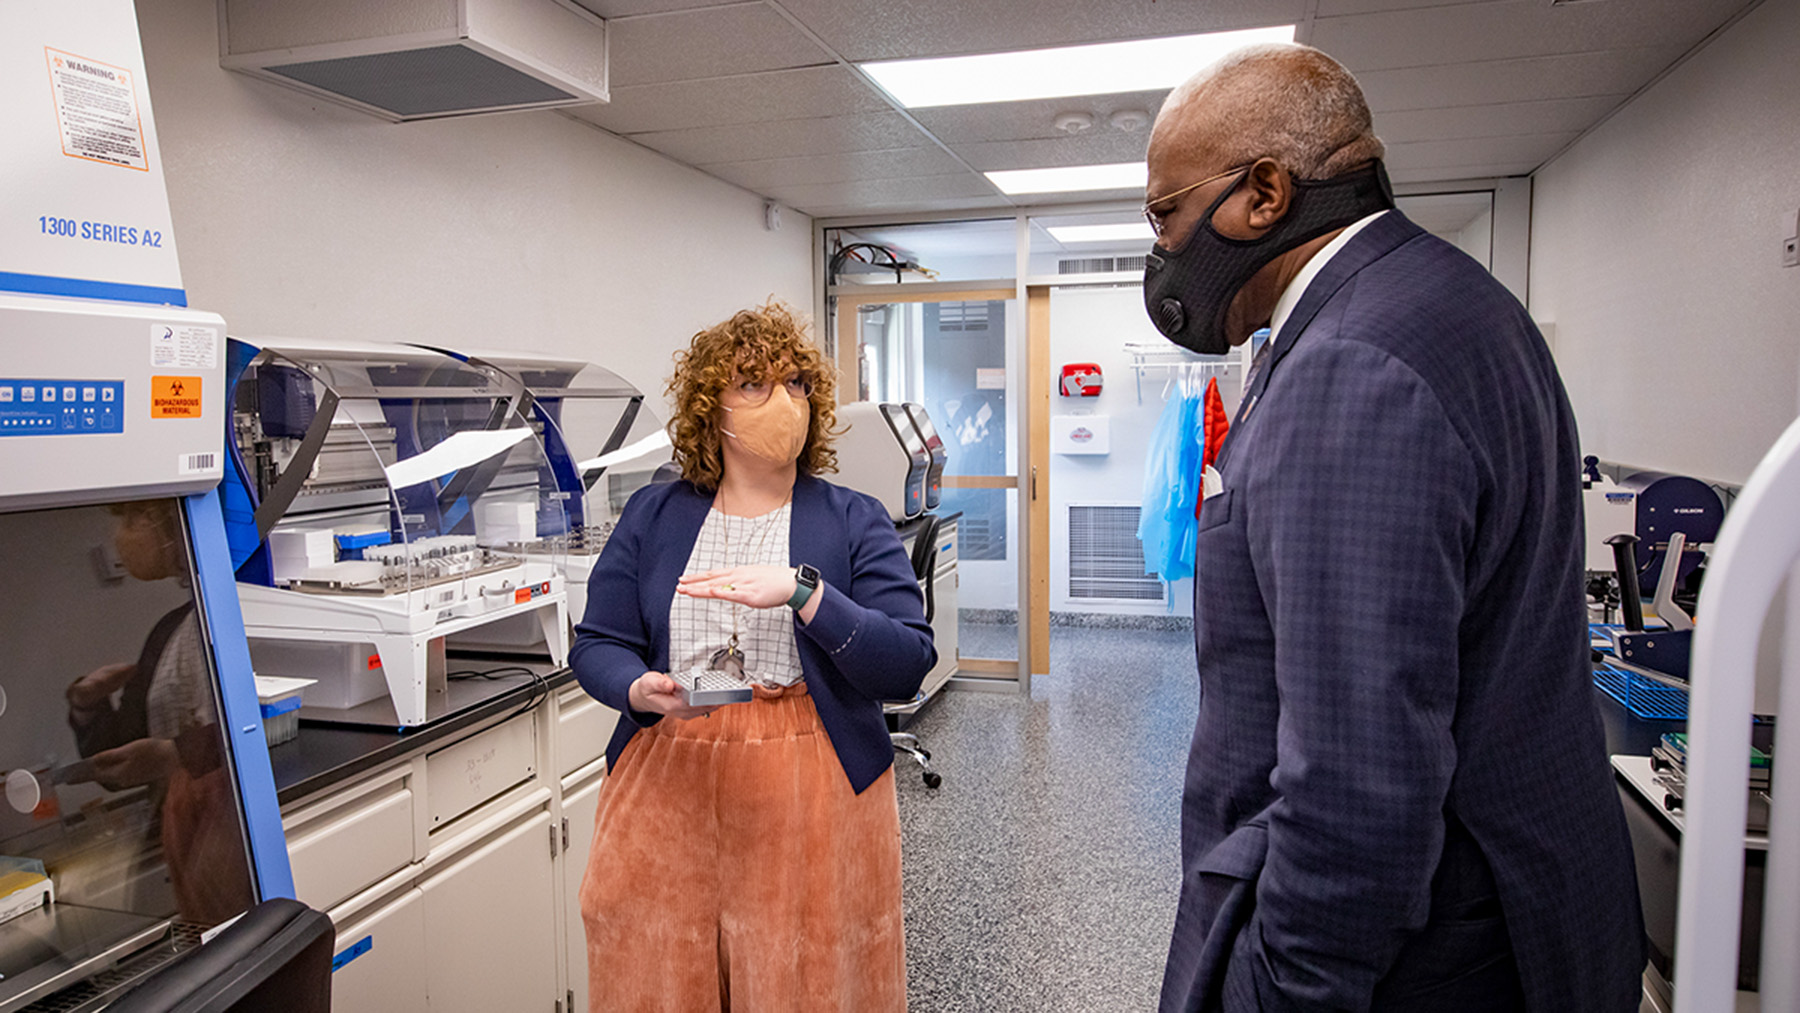 Professor Abigail Wooldridge gives Chancellor Robert Jones a tour of the facility. Photo by Fred Zwicky